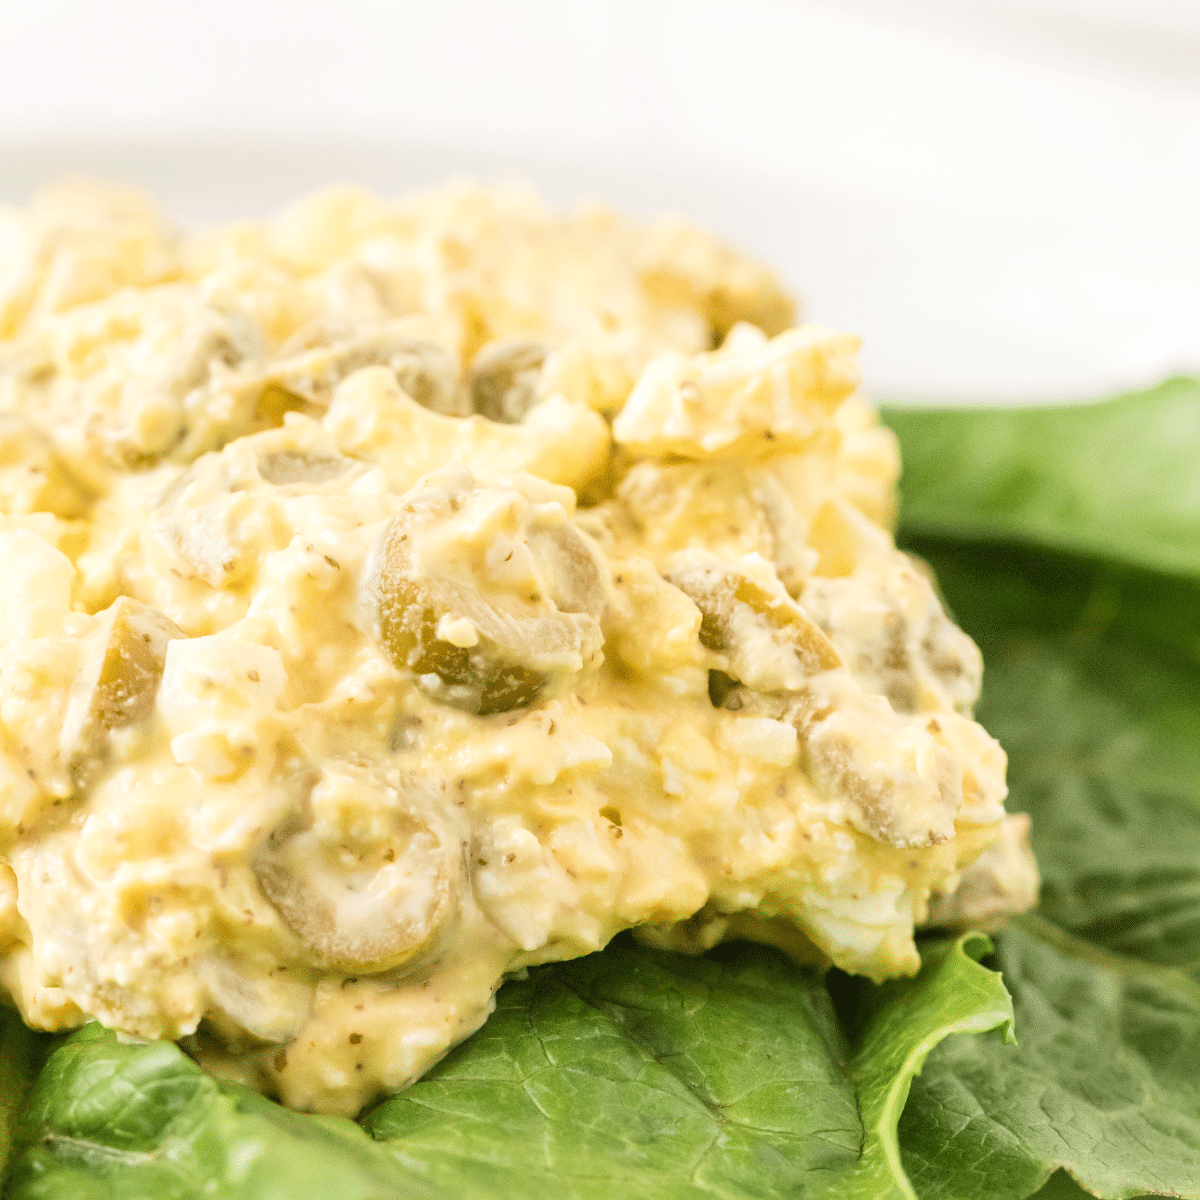 a scoop of egg and olive salad on a bed of lettuce leaves